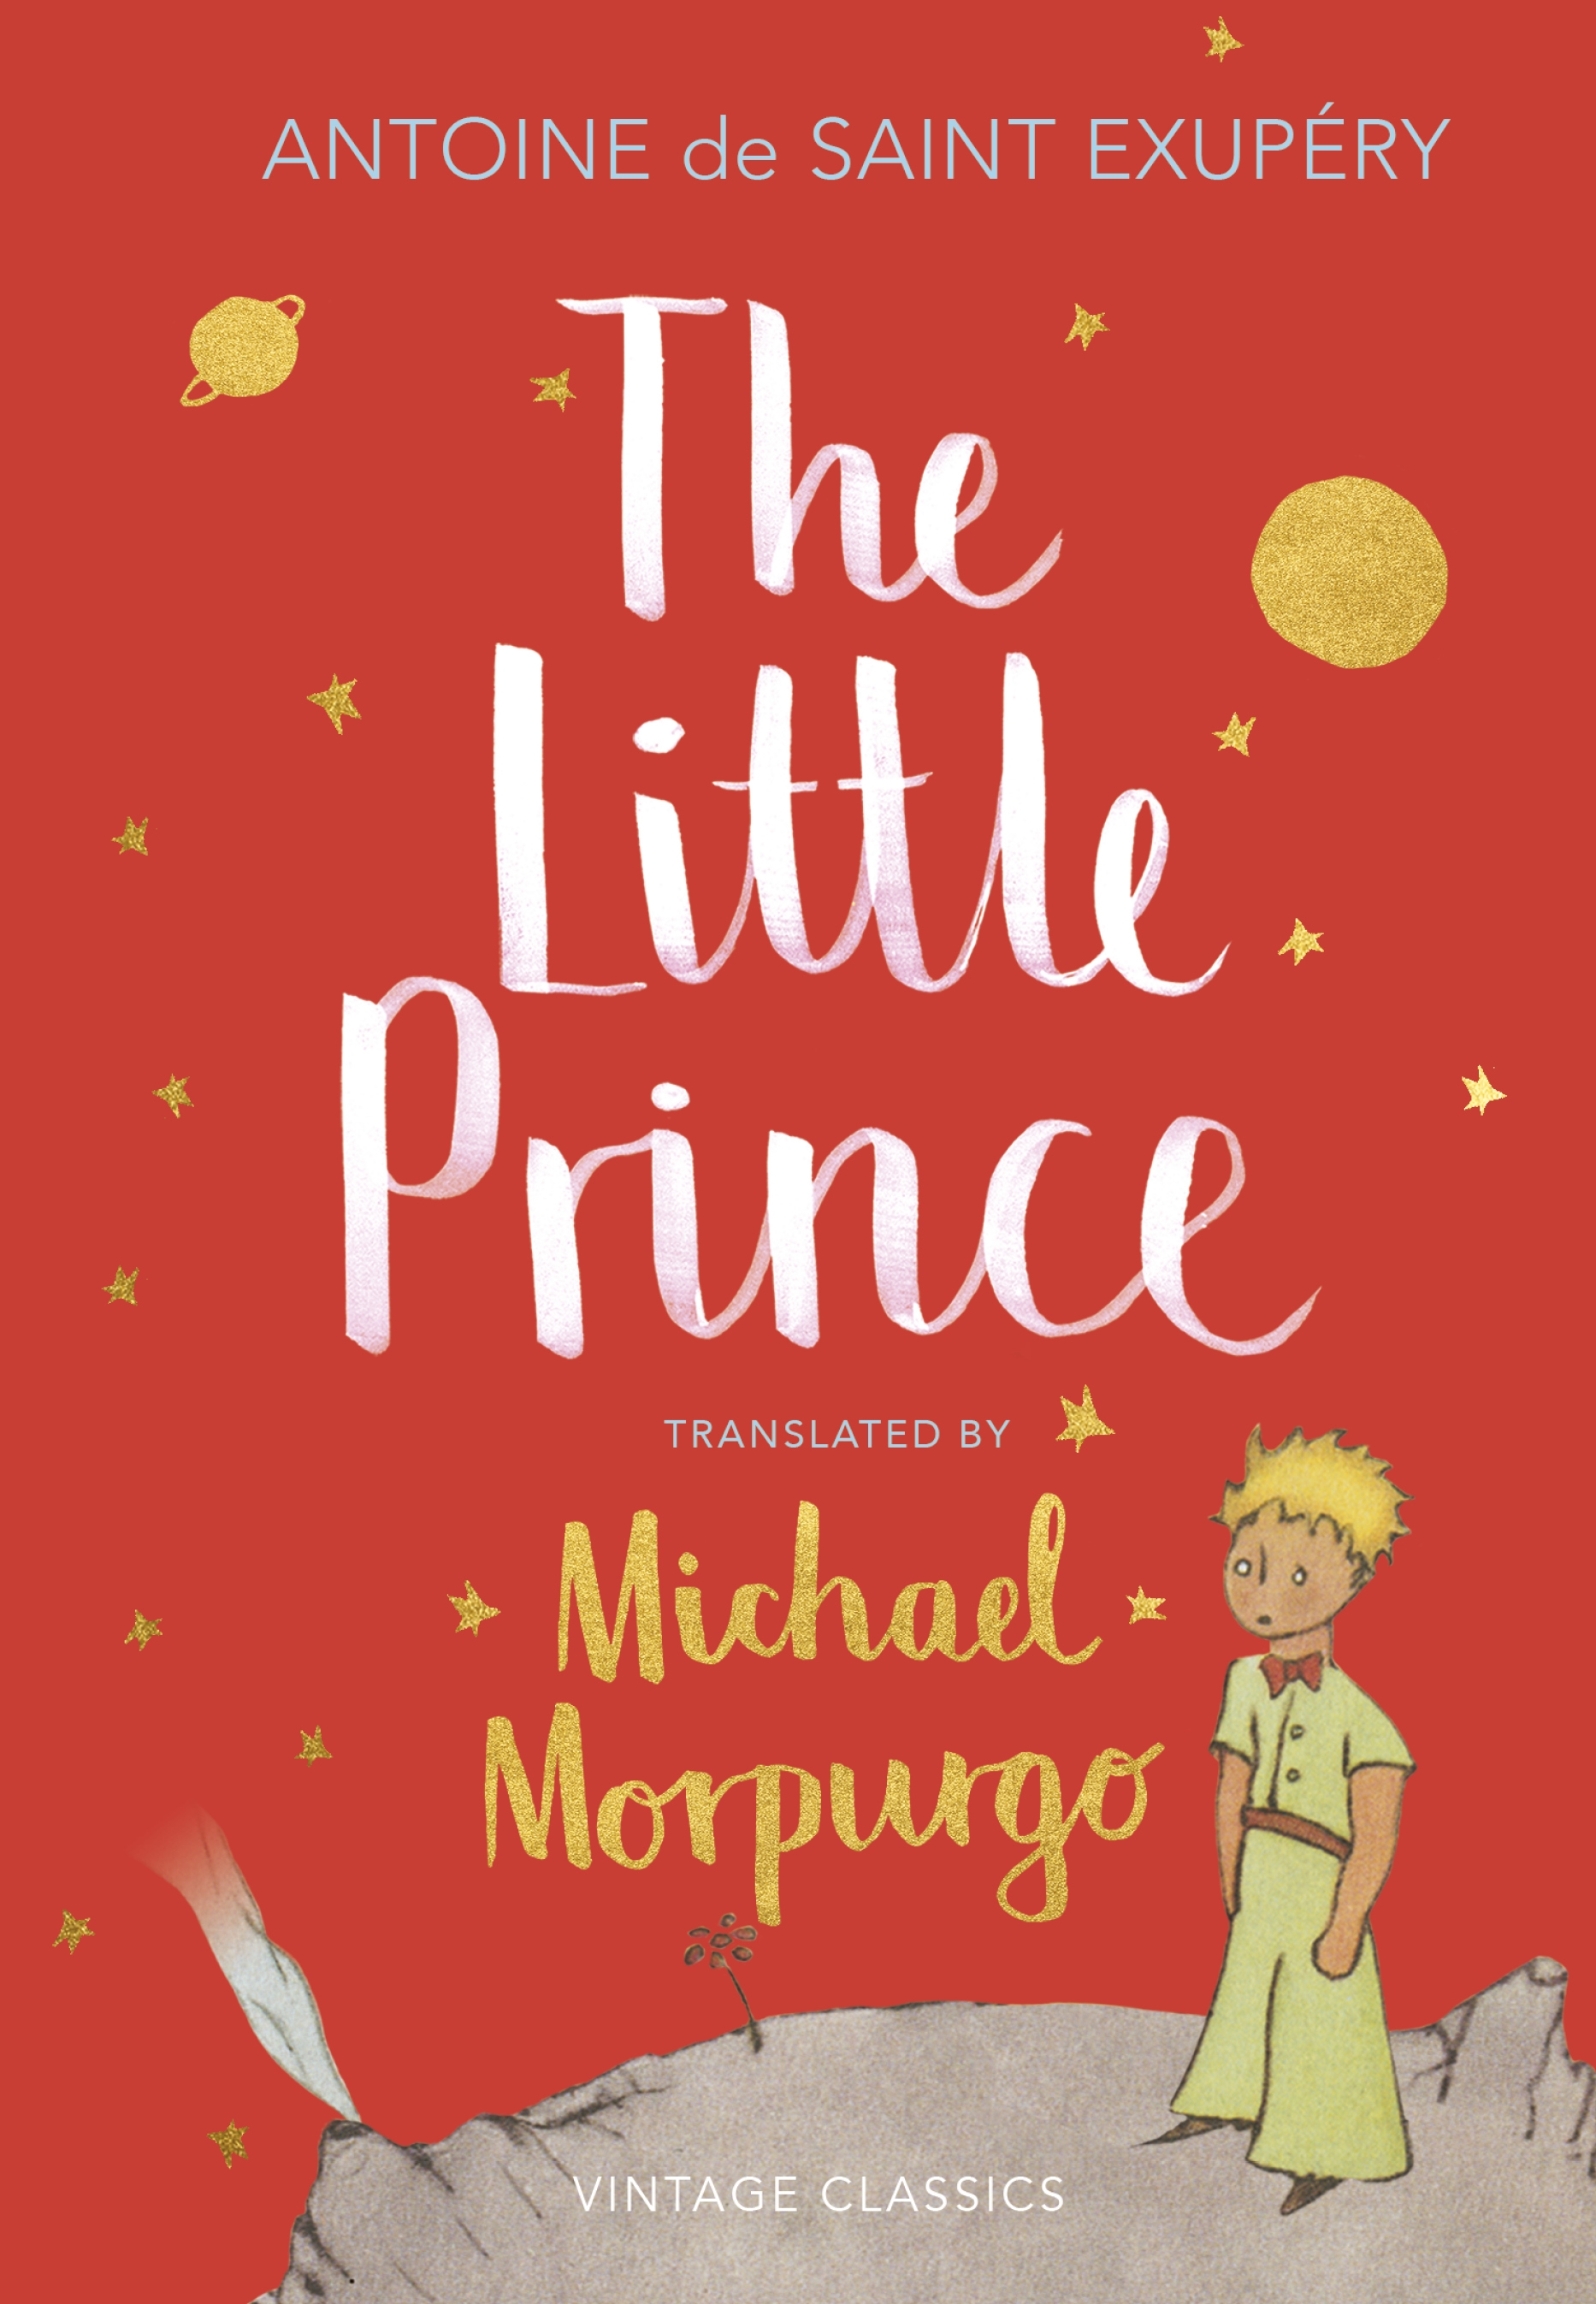 book review of little prince